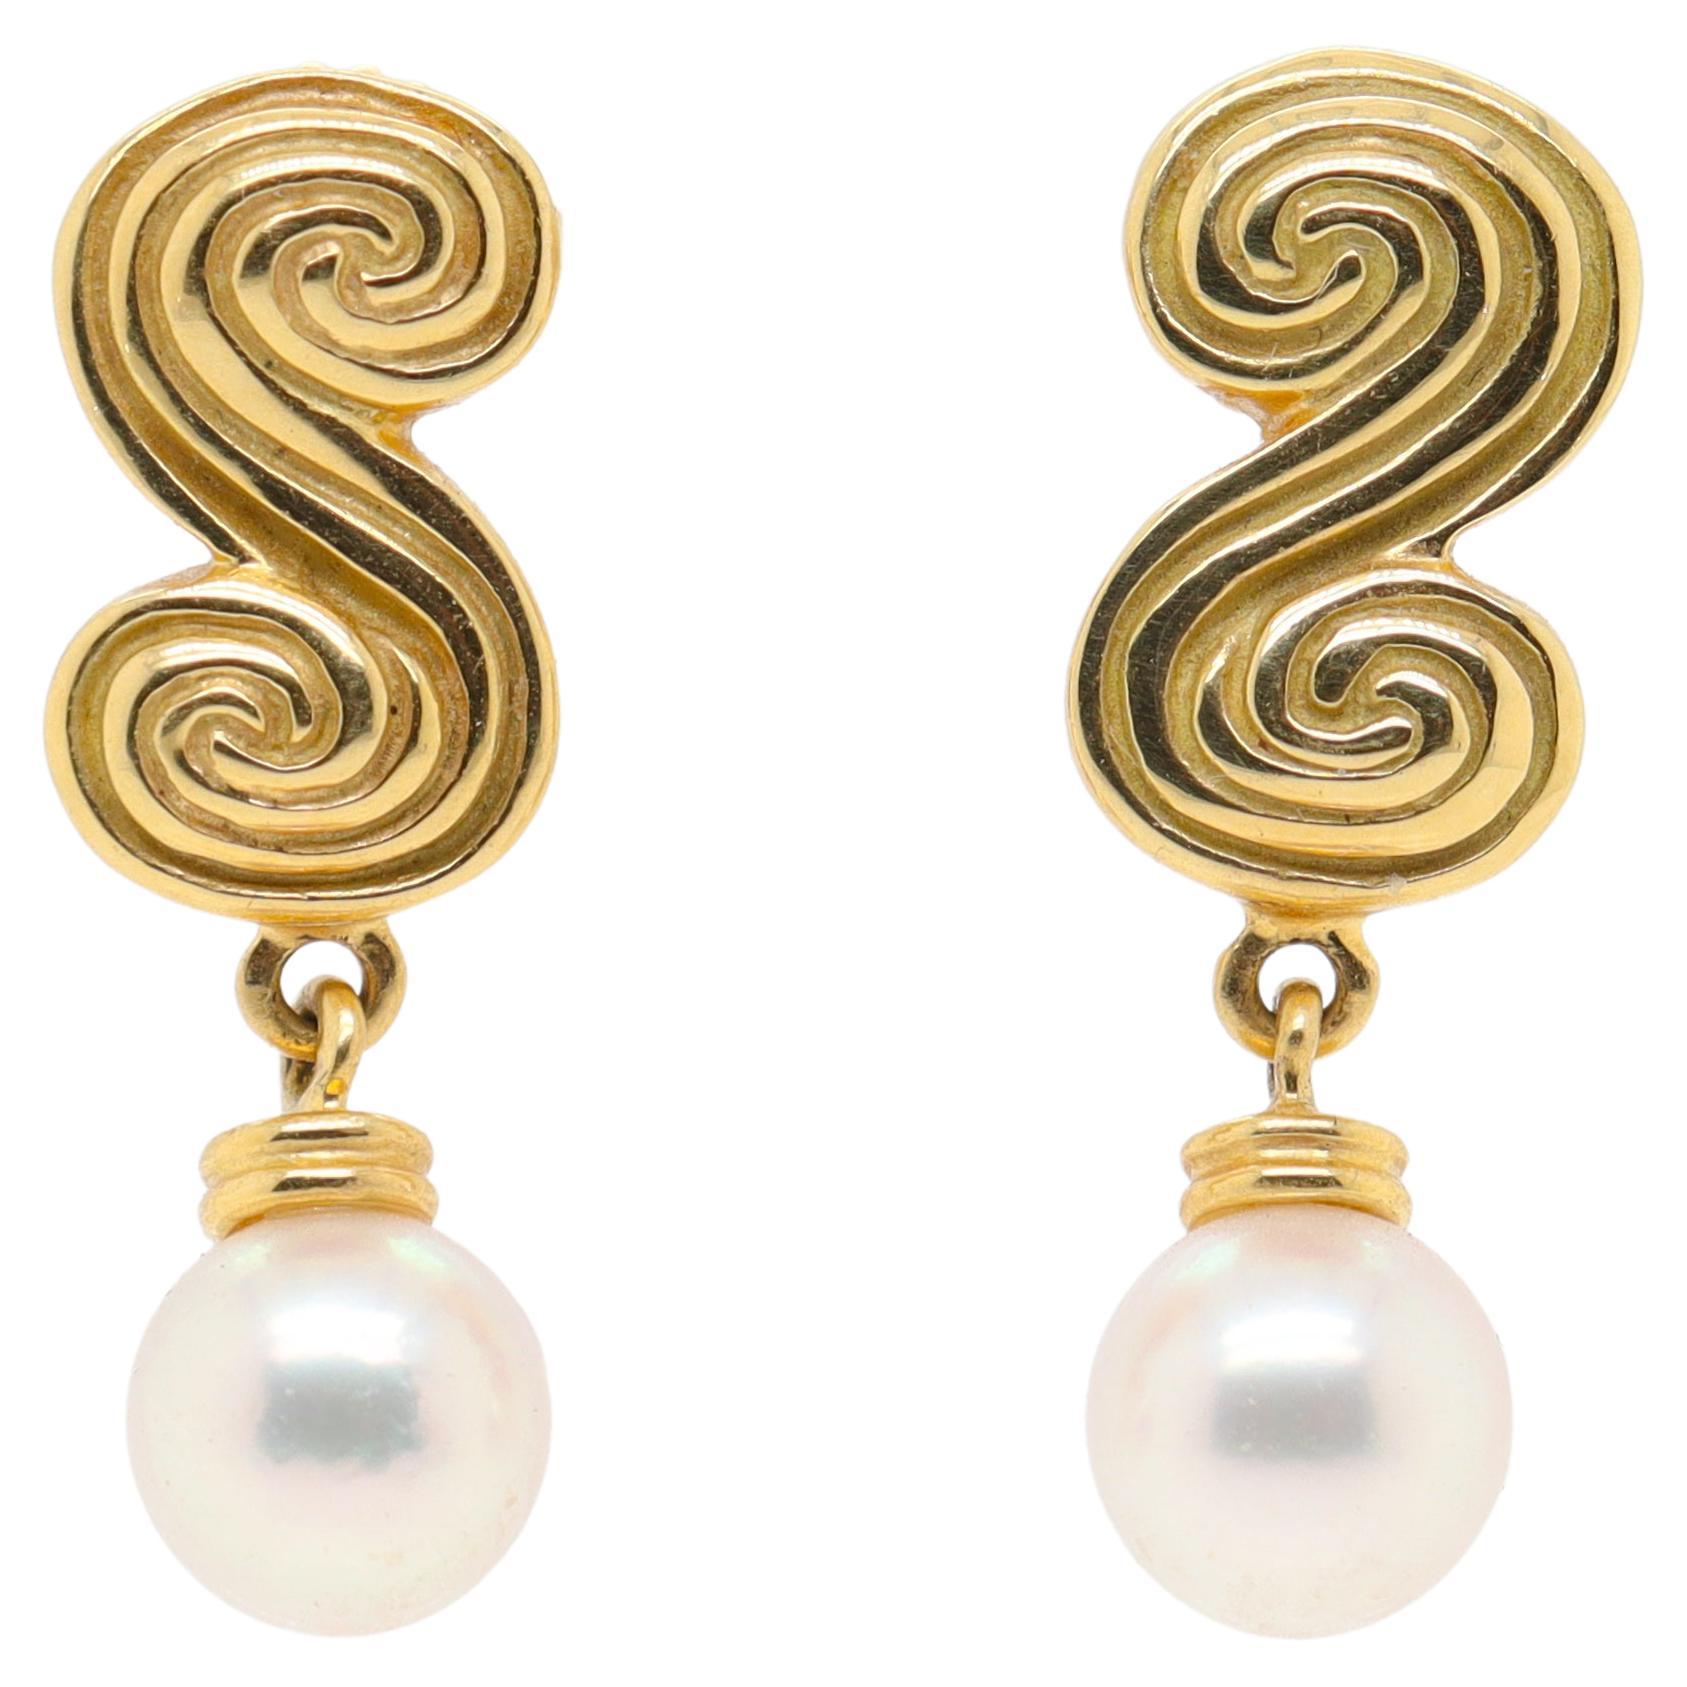 Vintage Tiffany & Co 18K Gold Double Spiral or 'S' Scroll Earrings w Pearl Drops For Sale